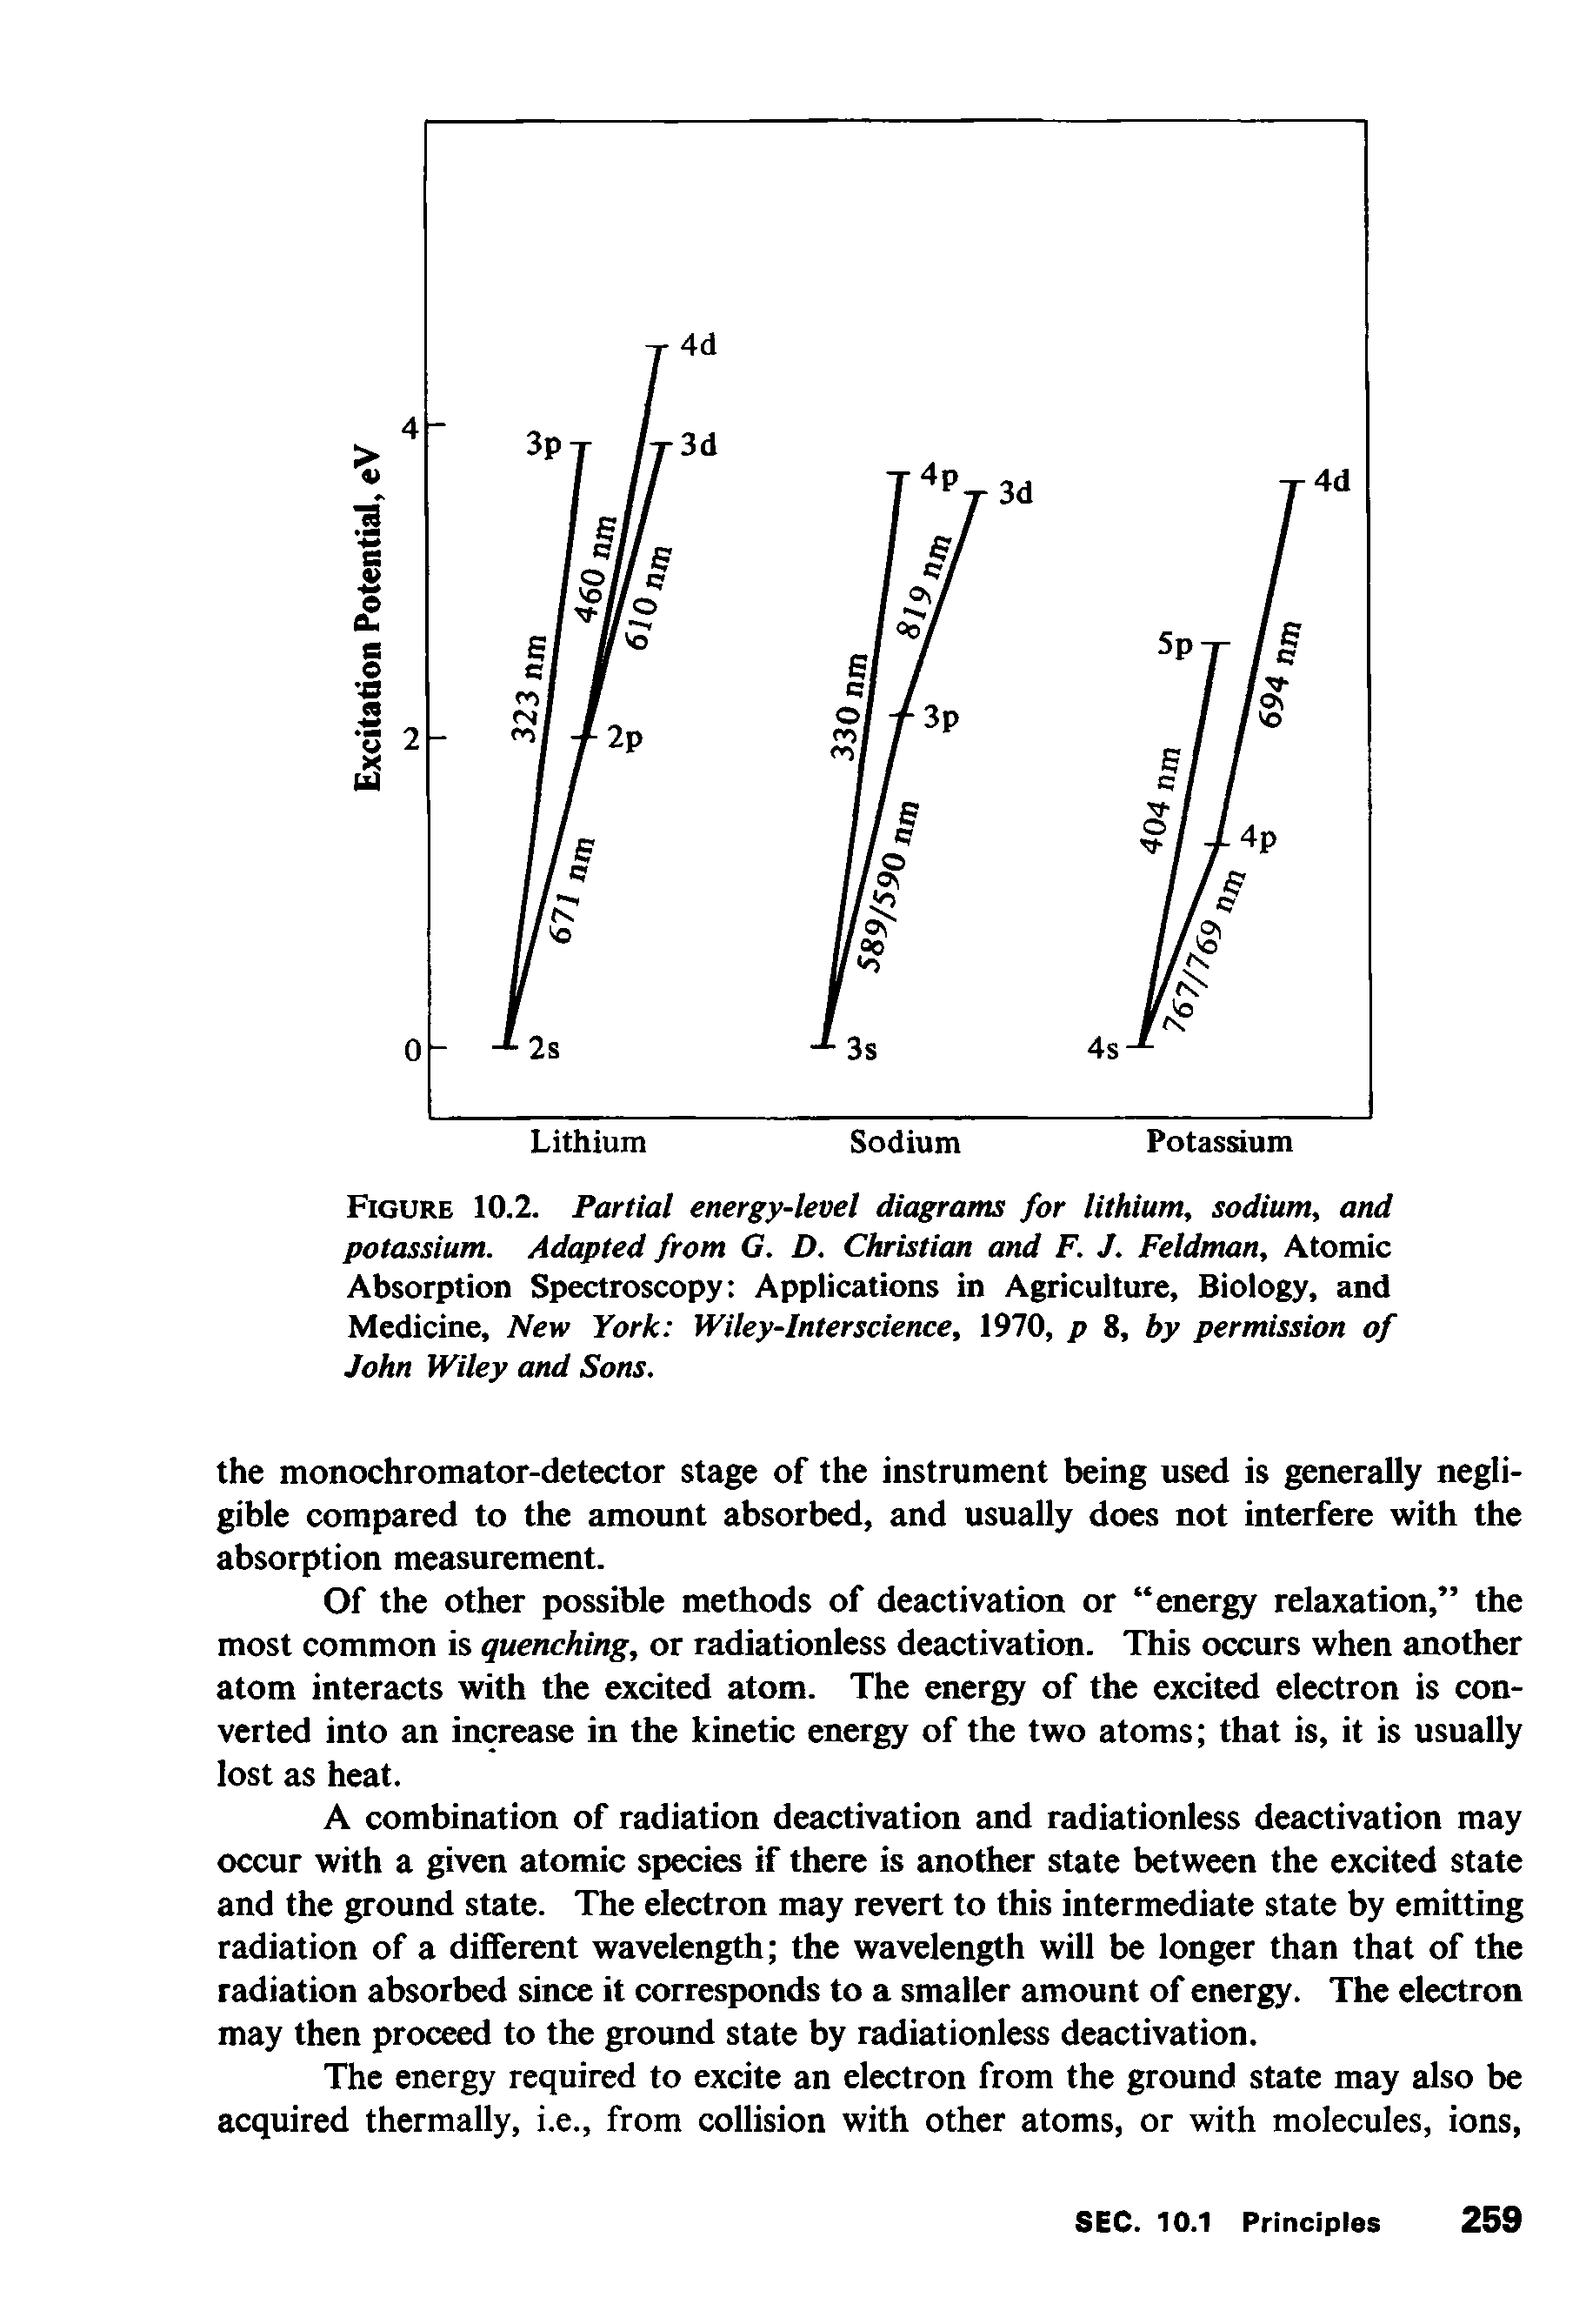 Figure 10.2. Partial energy-level diagrams for lithium, sodium, and potassium. Adapted from G. D. Christian and F. J. Feldman, Atomic Absorption Spectroscopy Applications in Agriculture, Biology, and Medicine, New York Wiley-Interscience, 1970, p 8, by permission of John Wiley and Sons.